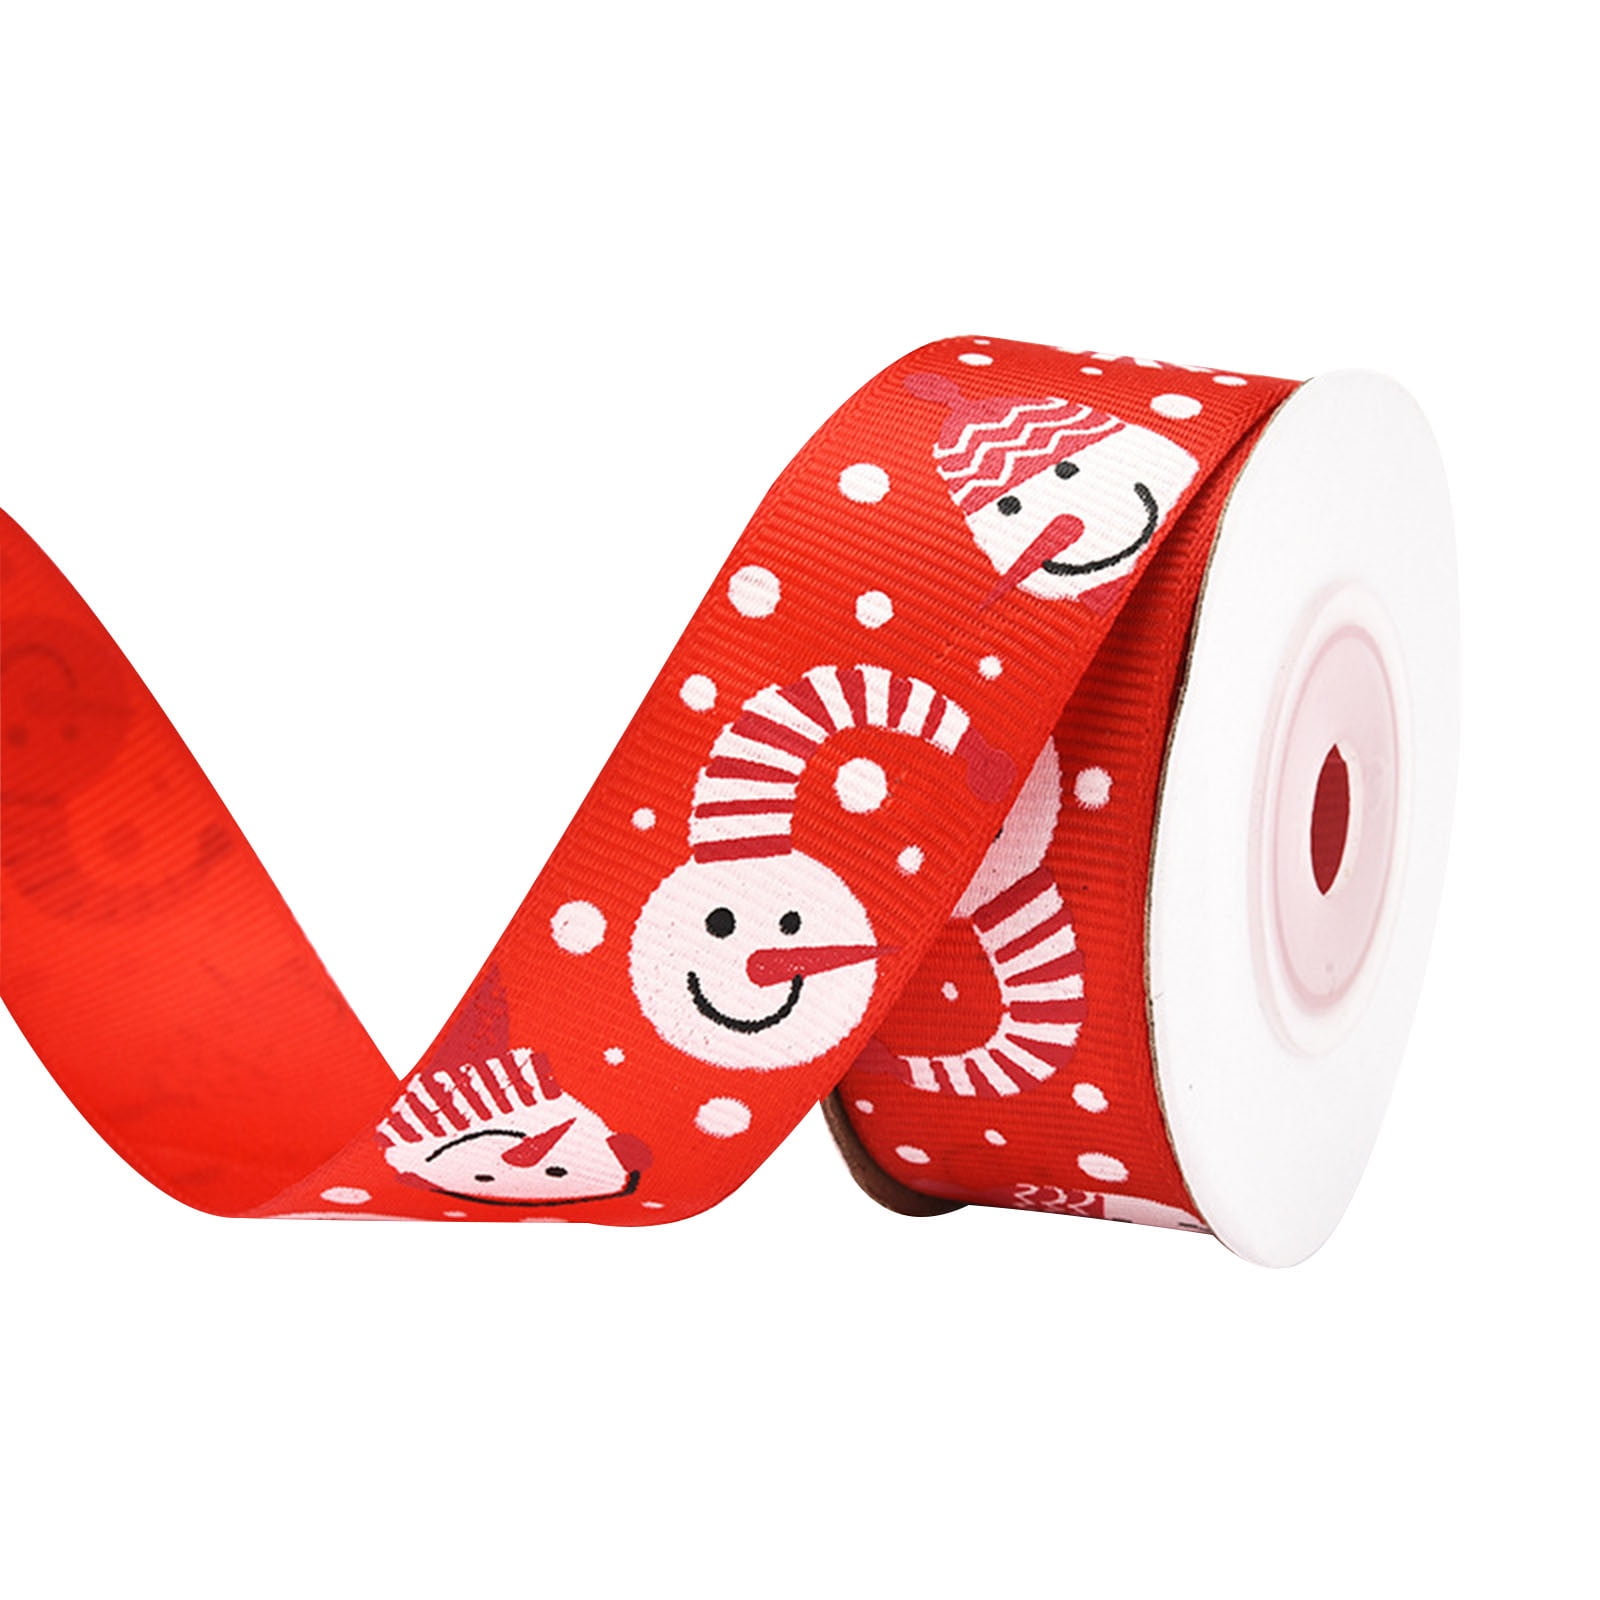 Frcolor Christmas Ribbon Gift Ribbon Polyester Craft Thin Red Trim Wrapping Ribbonsbows Ribbons Wired Grosgrain Wrap, Size: 2.56 x 2.56 x 1.97